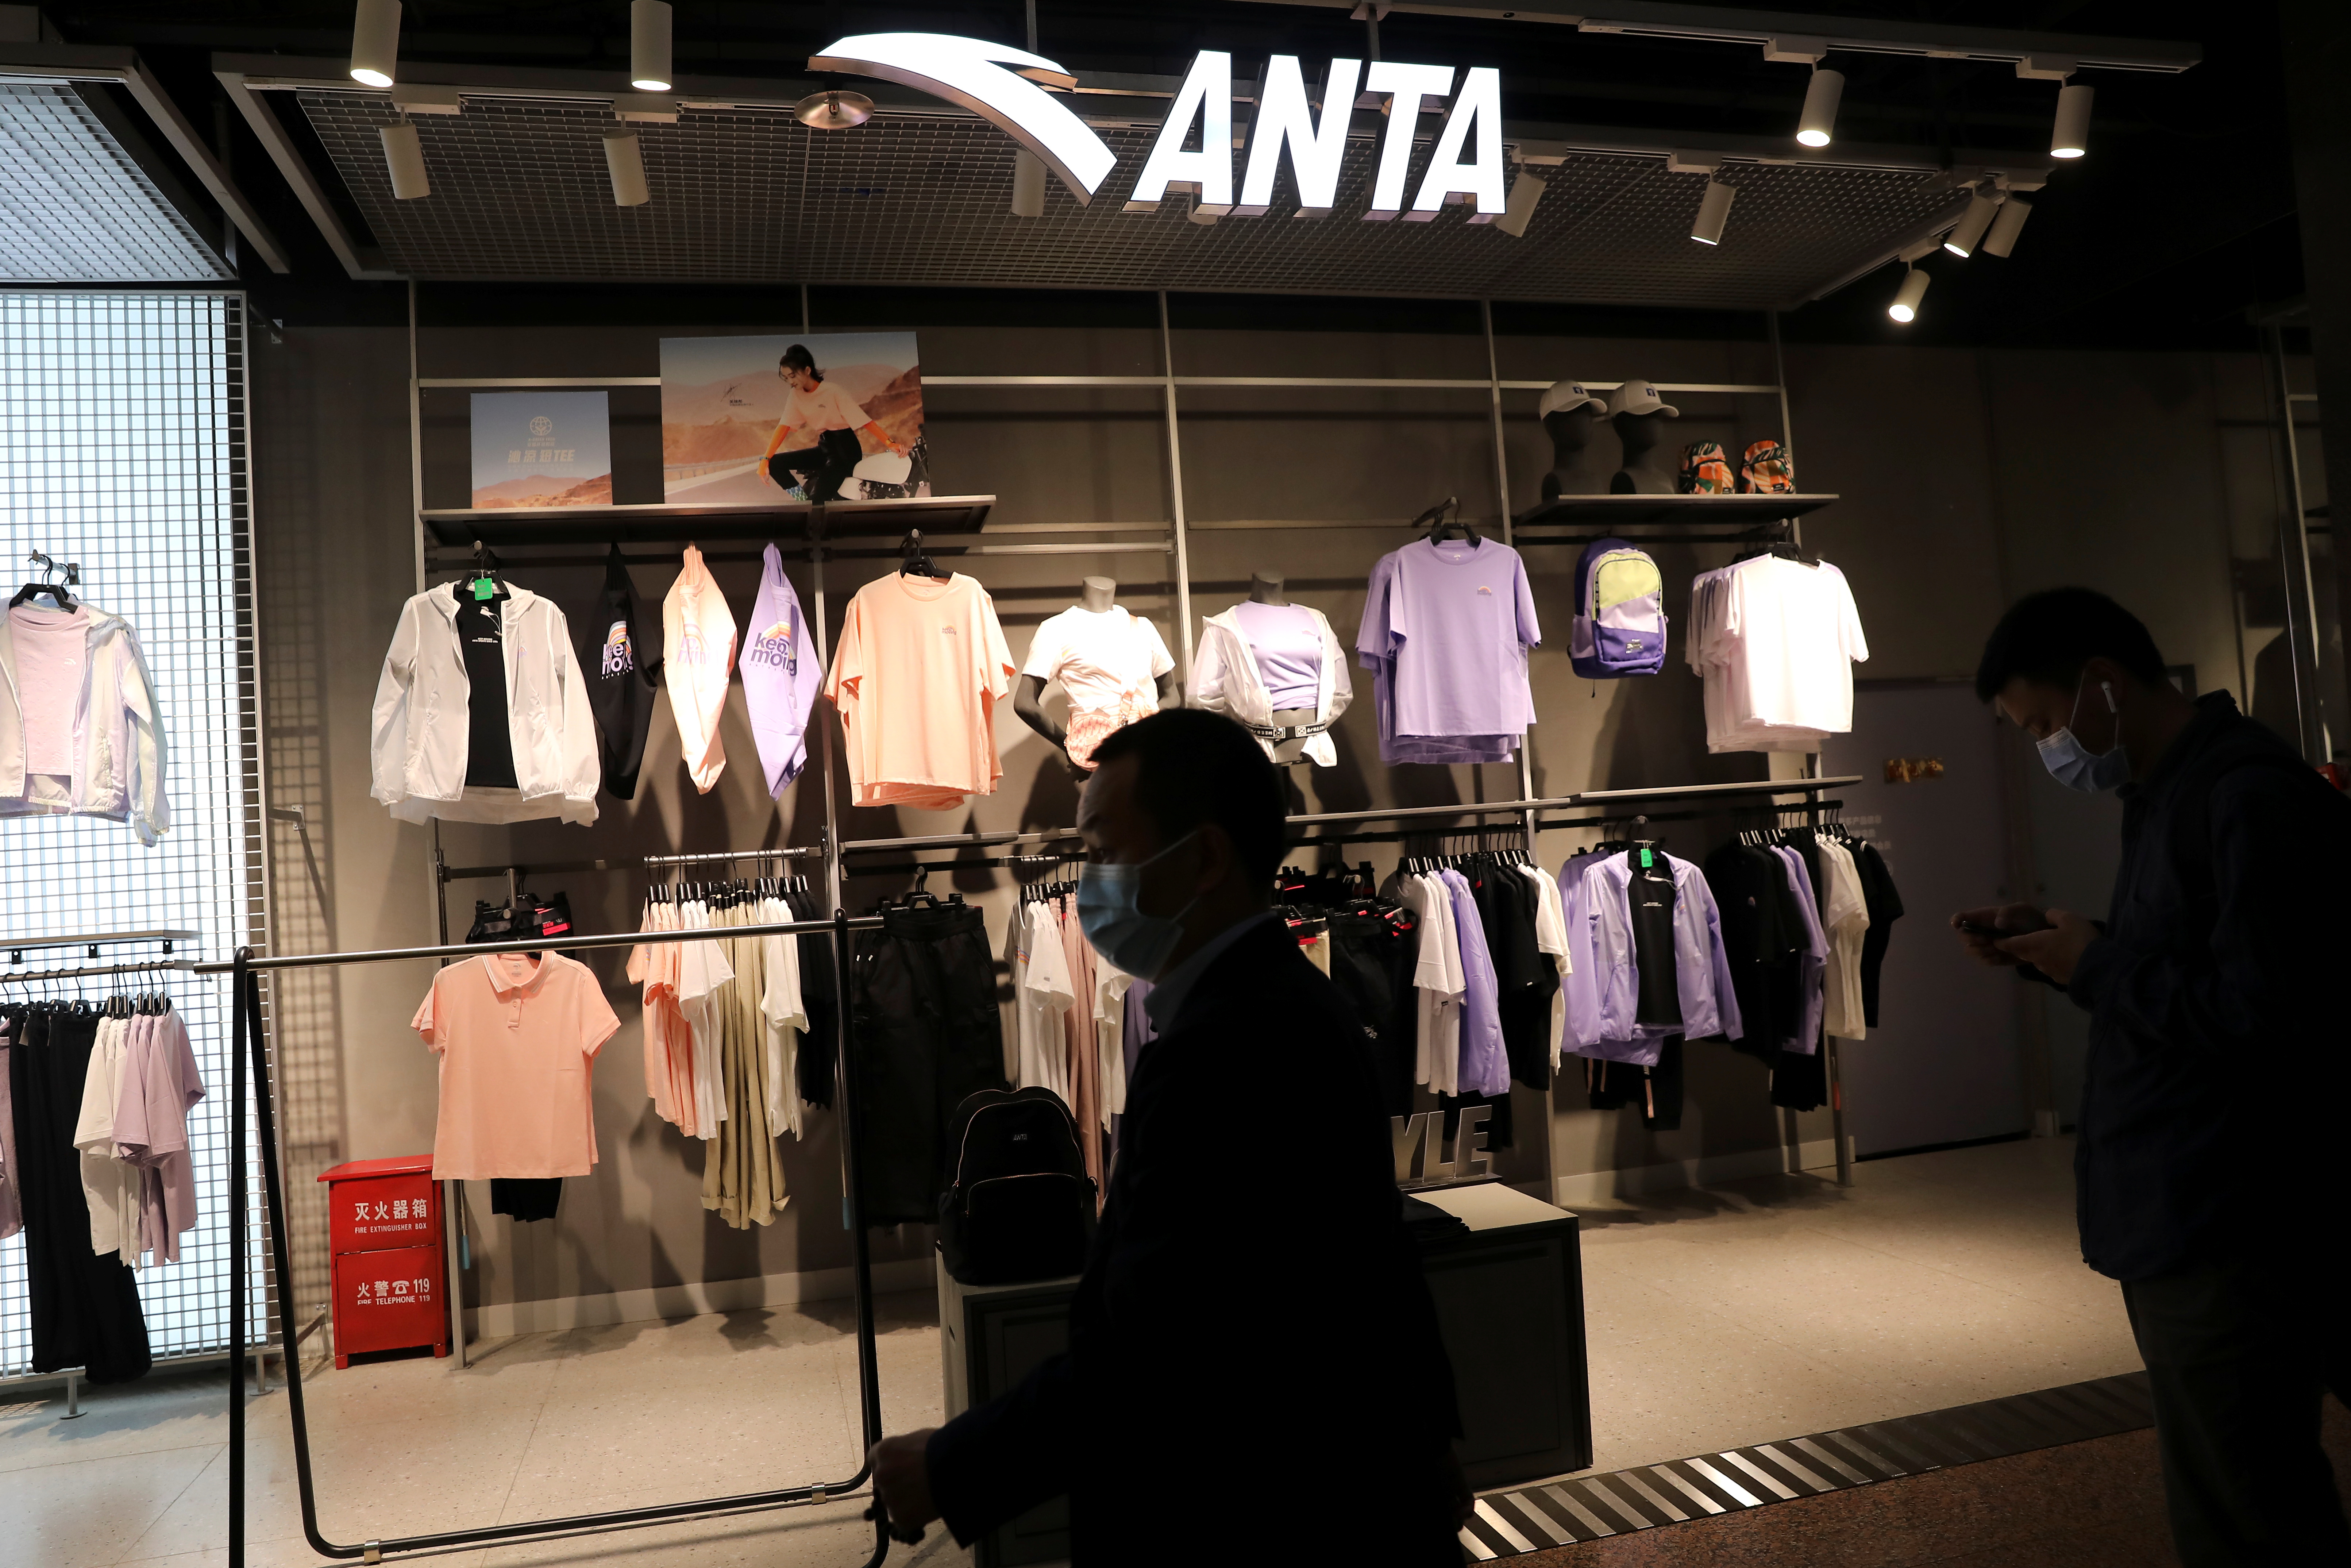 People walk past a store of Chinese sportswear brand Anta in Beijing, China April 15, 2021. Picture taken April 15, 2021. REUTERS/Tingshu Wang